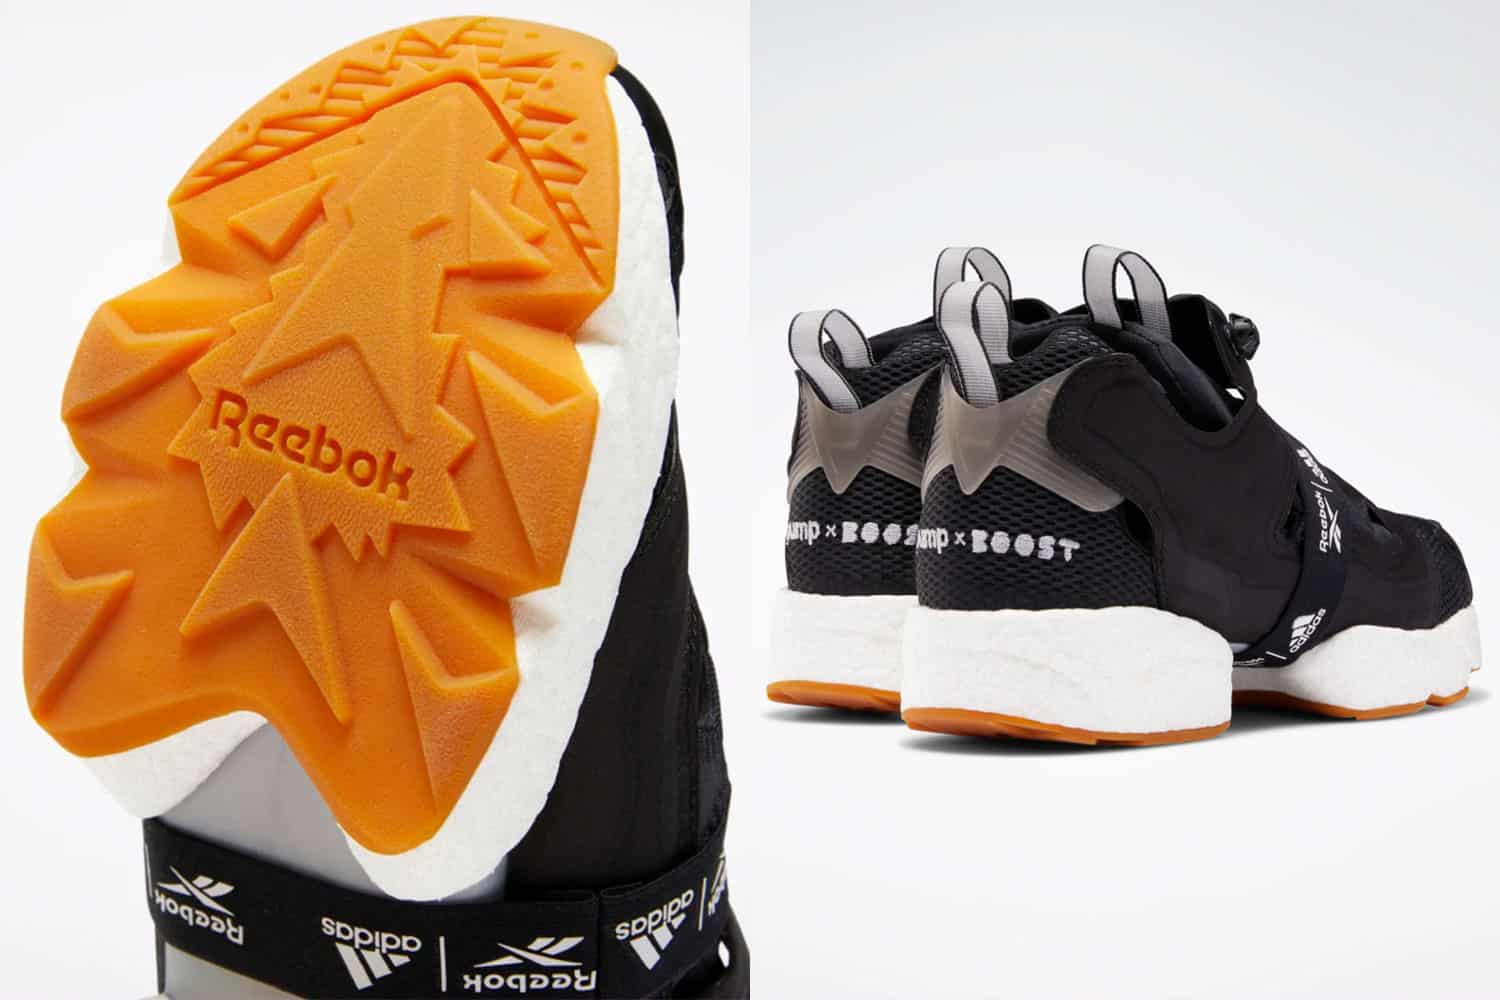 Reebok and Adidas Actually Collaborated 